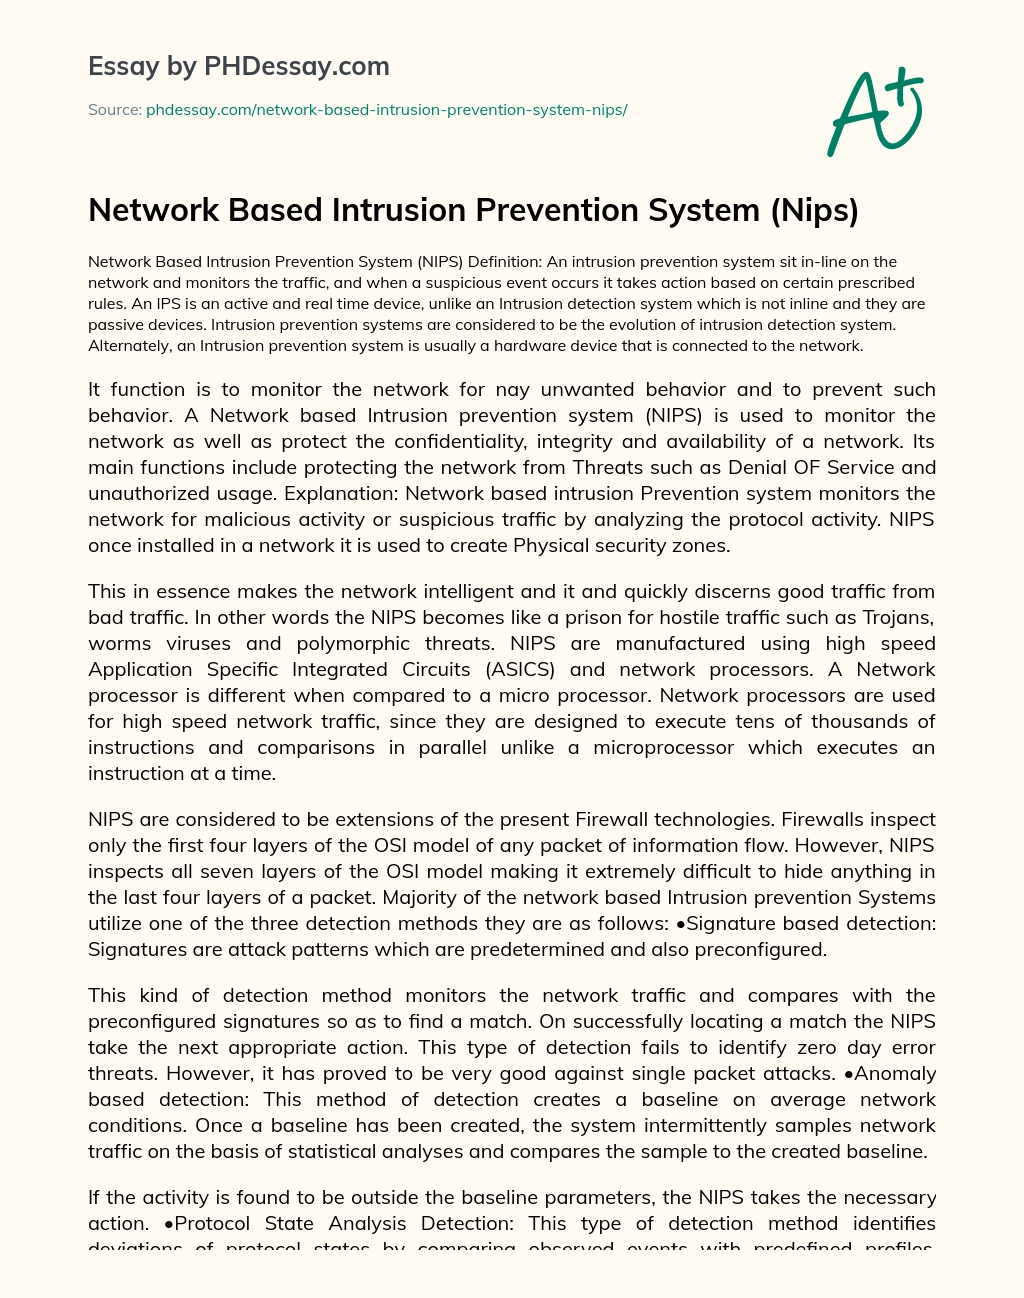 Network Based Intrusion Prevention System (Nips) essay